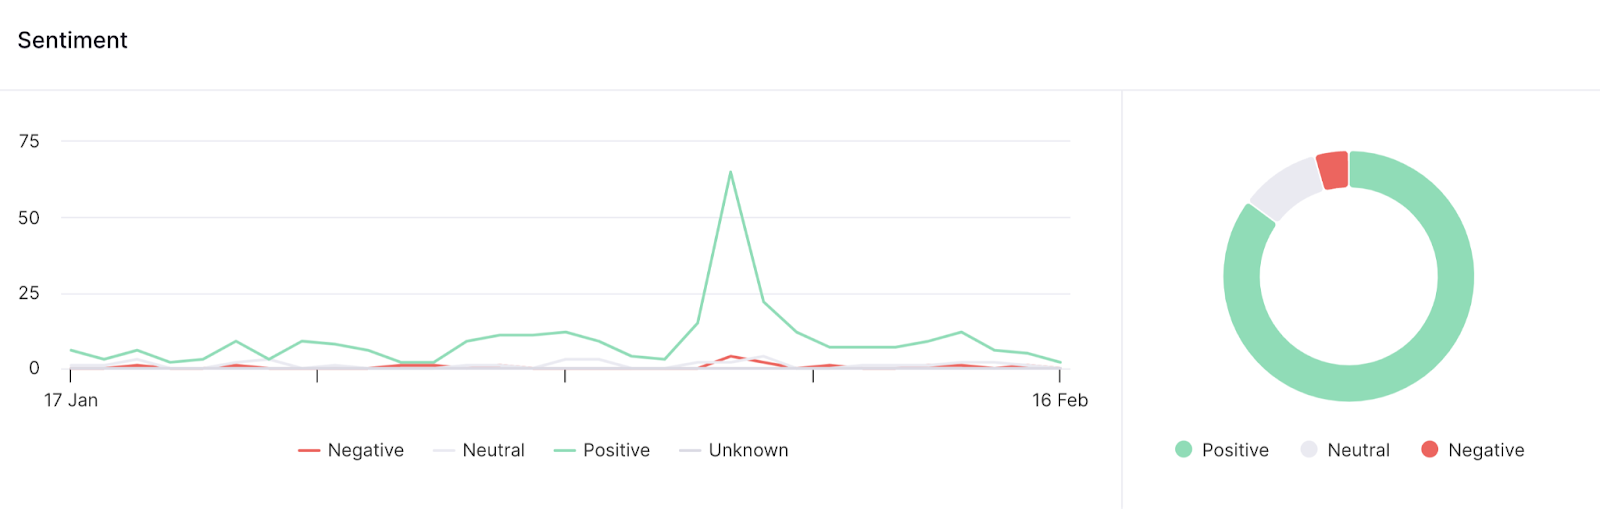 "Sentiment" trend graph shown in Brand Monitoring app